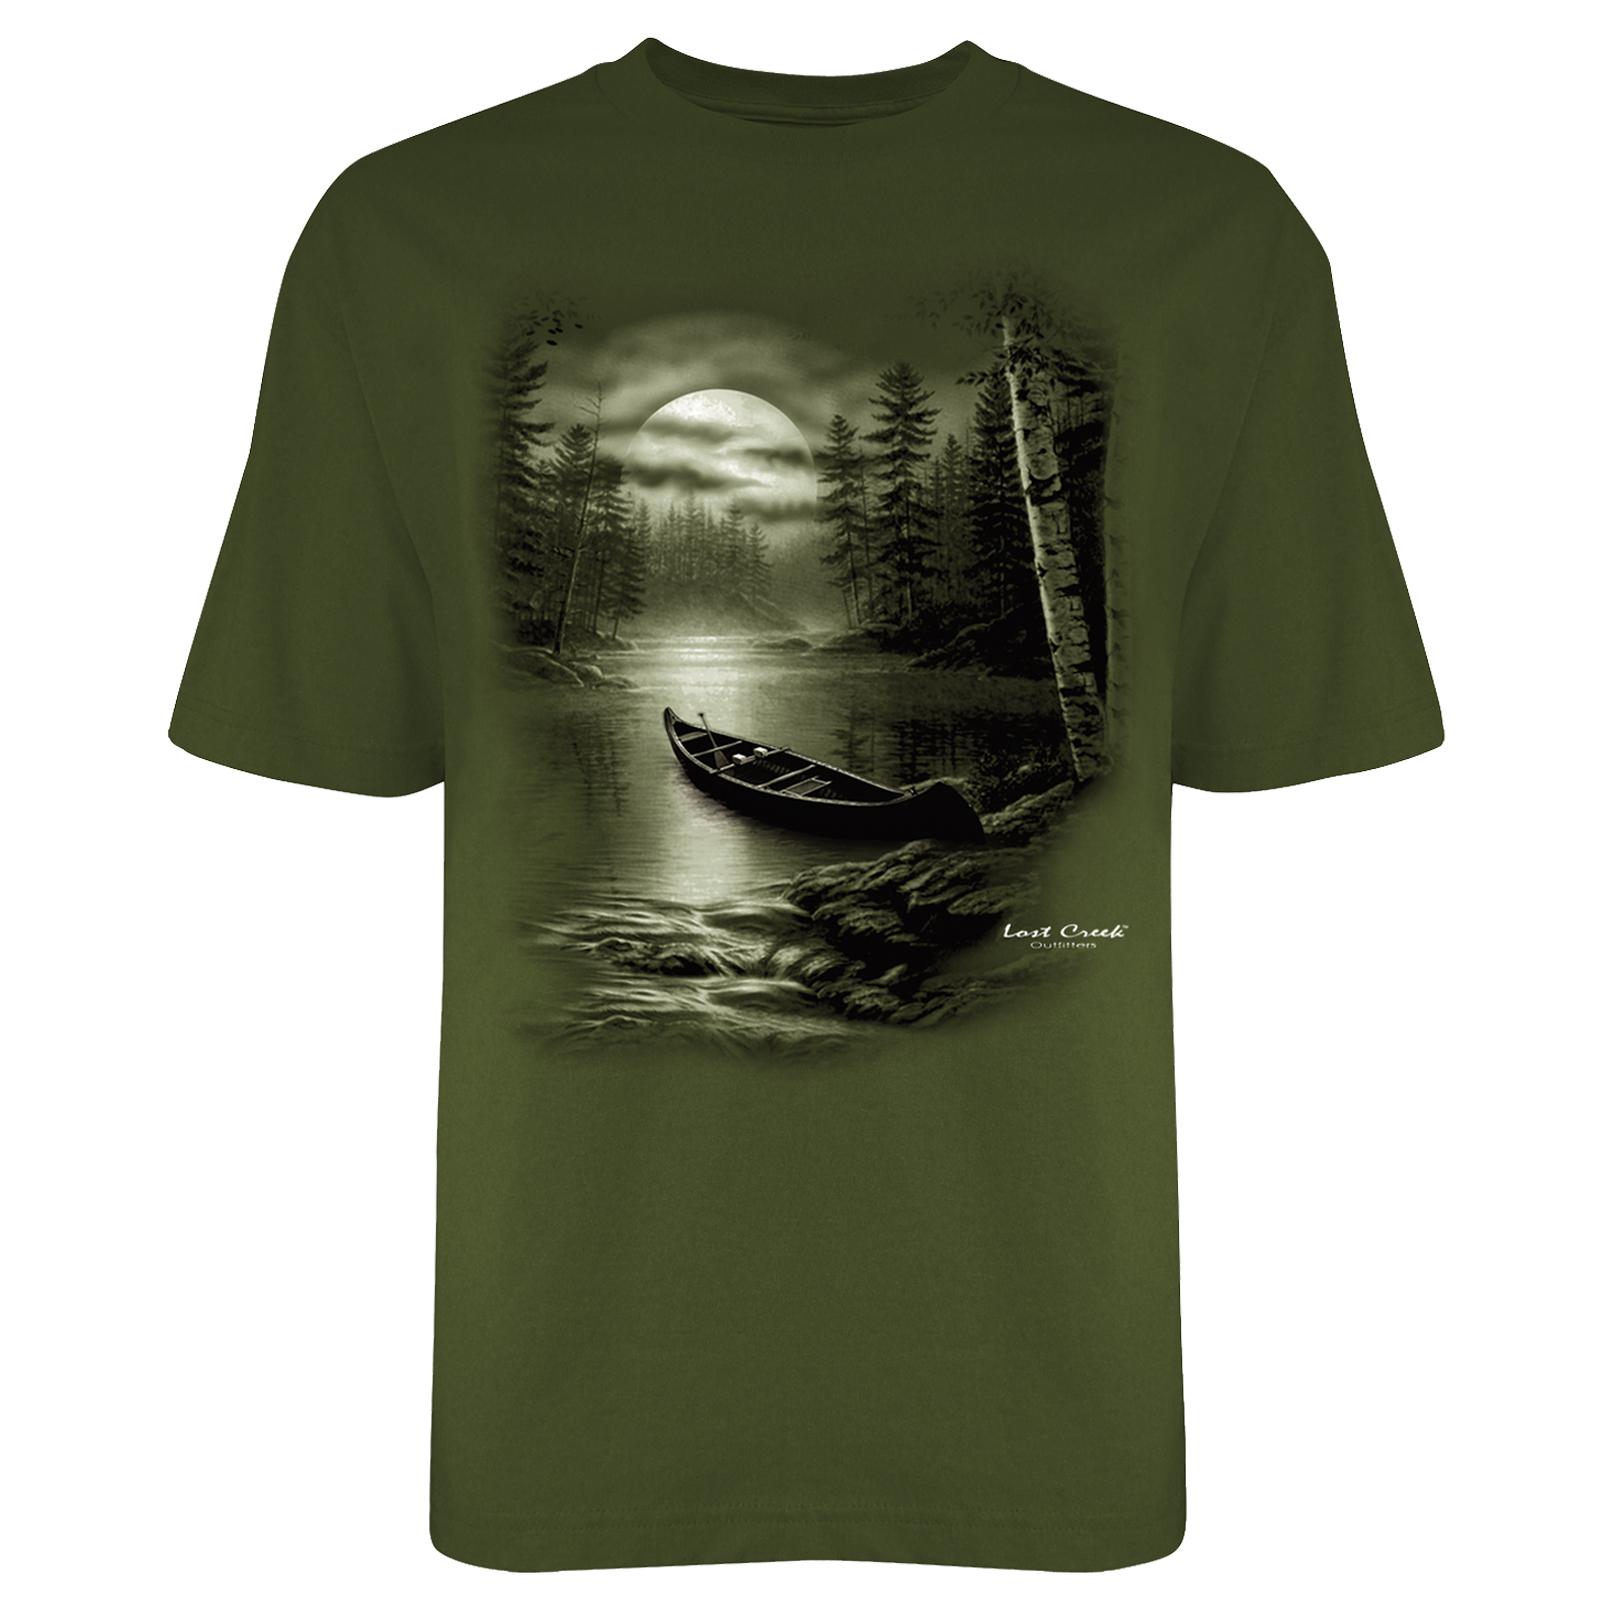 Men's Graphic T-Shirt - Great Outdoors